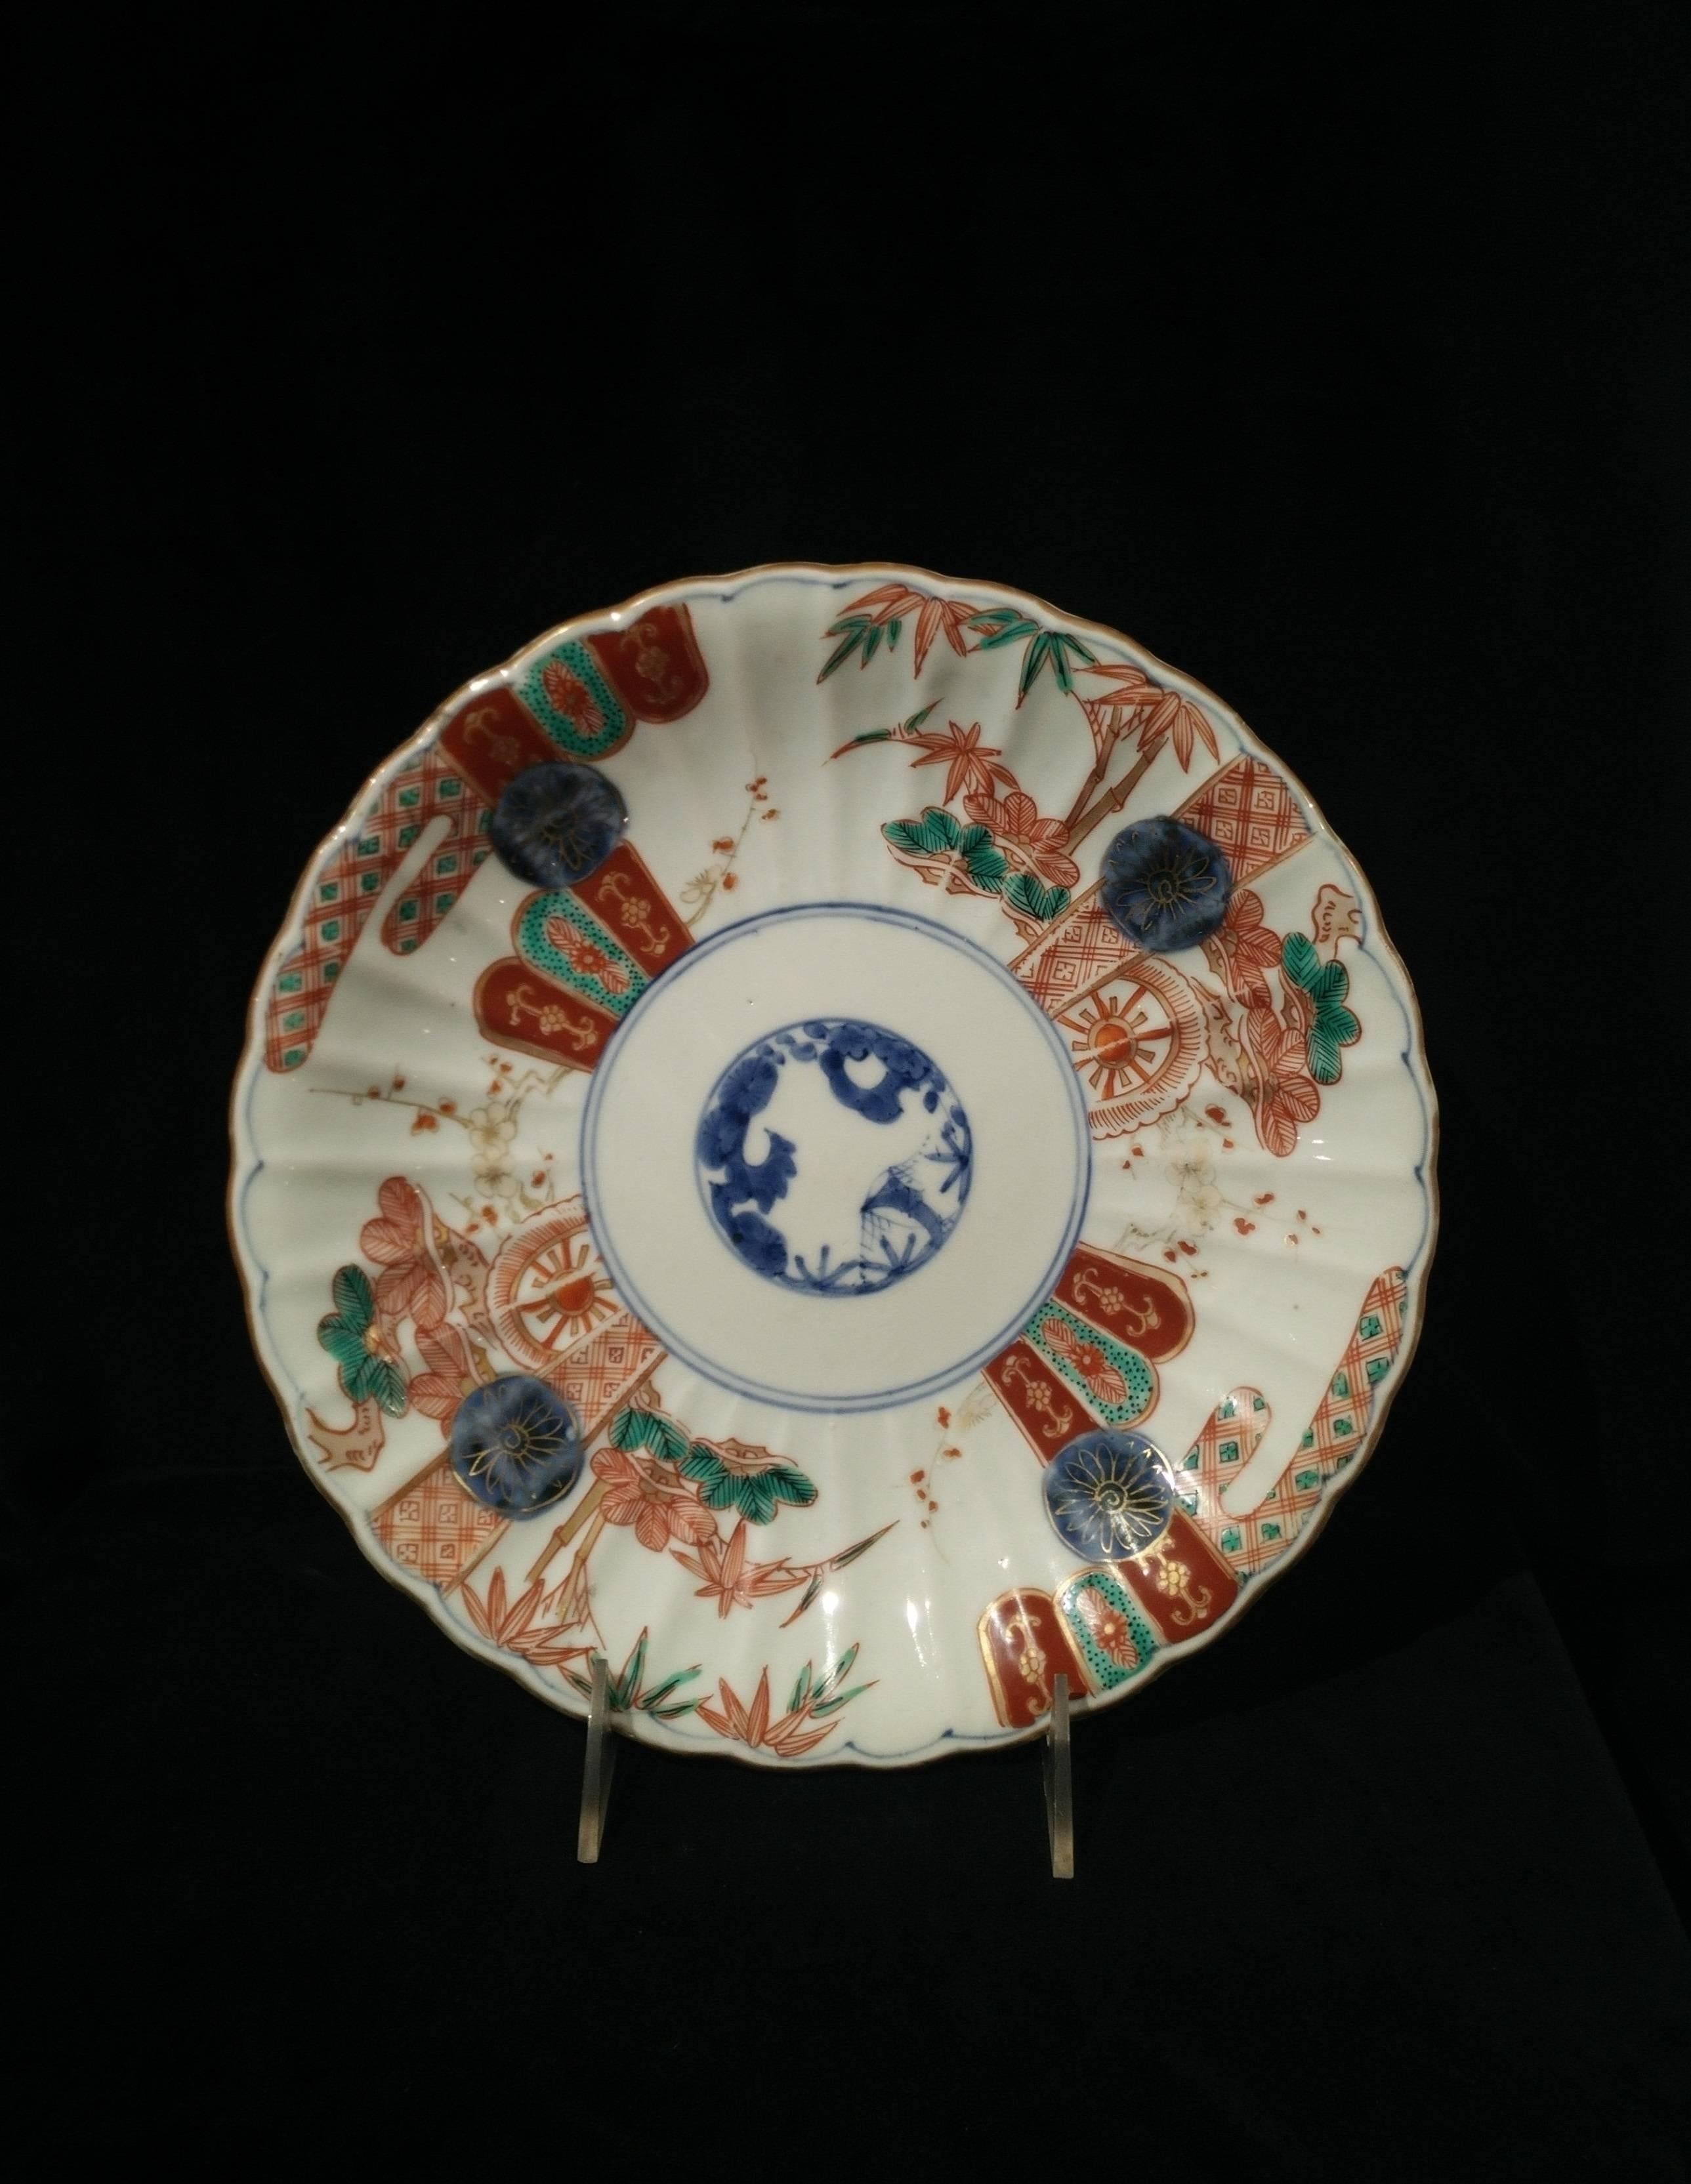 The chrysanthemum shaped plate with a central medallion in underglaze blue depicting pine, prunus and bamboo. The cavetto decorated in overglaze red, green and gold with pine, prunus and bamboo alternating with textile patterns.